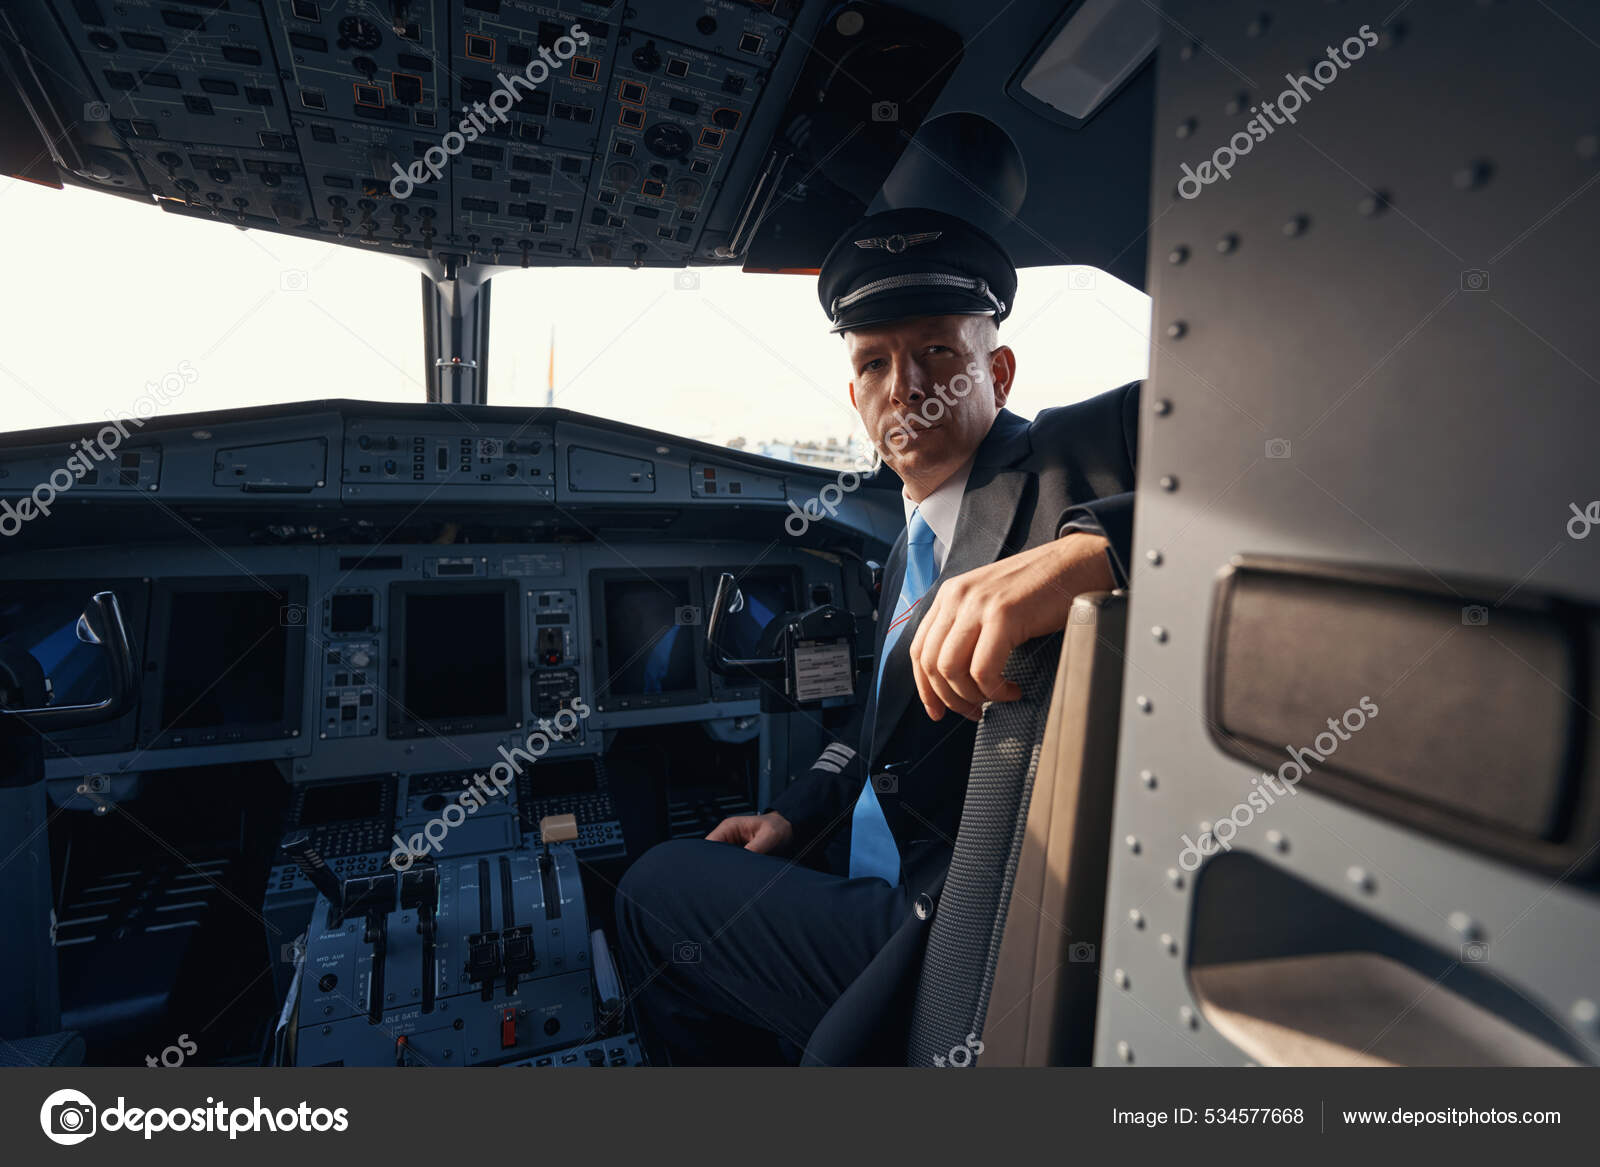 Airplane Cockpit Pilots Sitting Front Of Dashboard Aircraft Inside